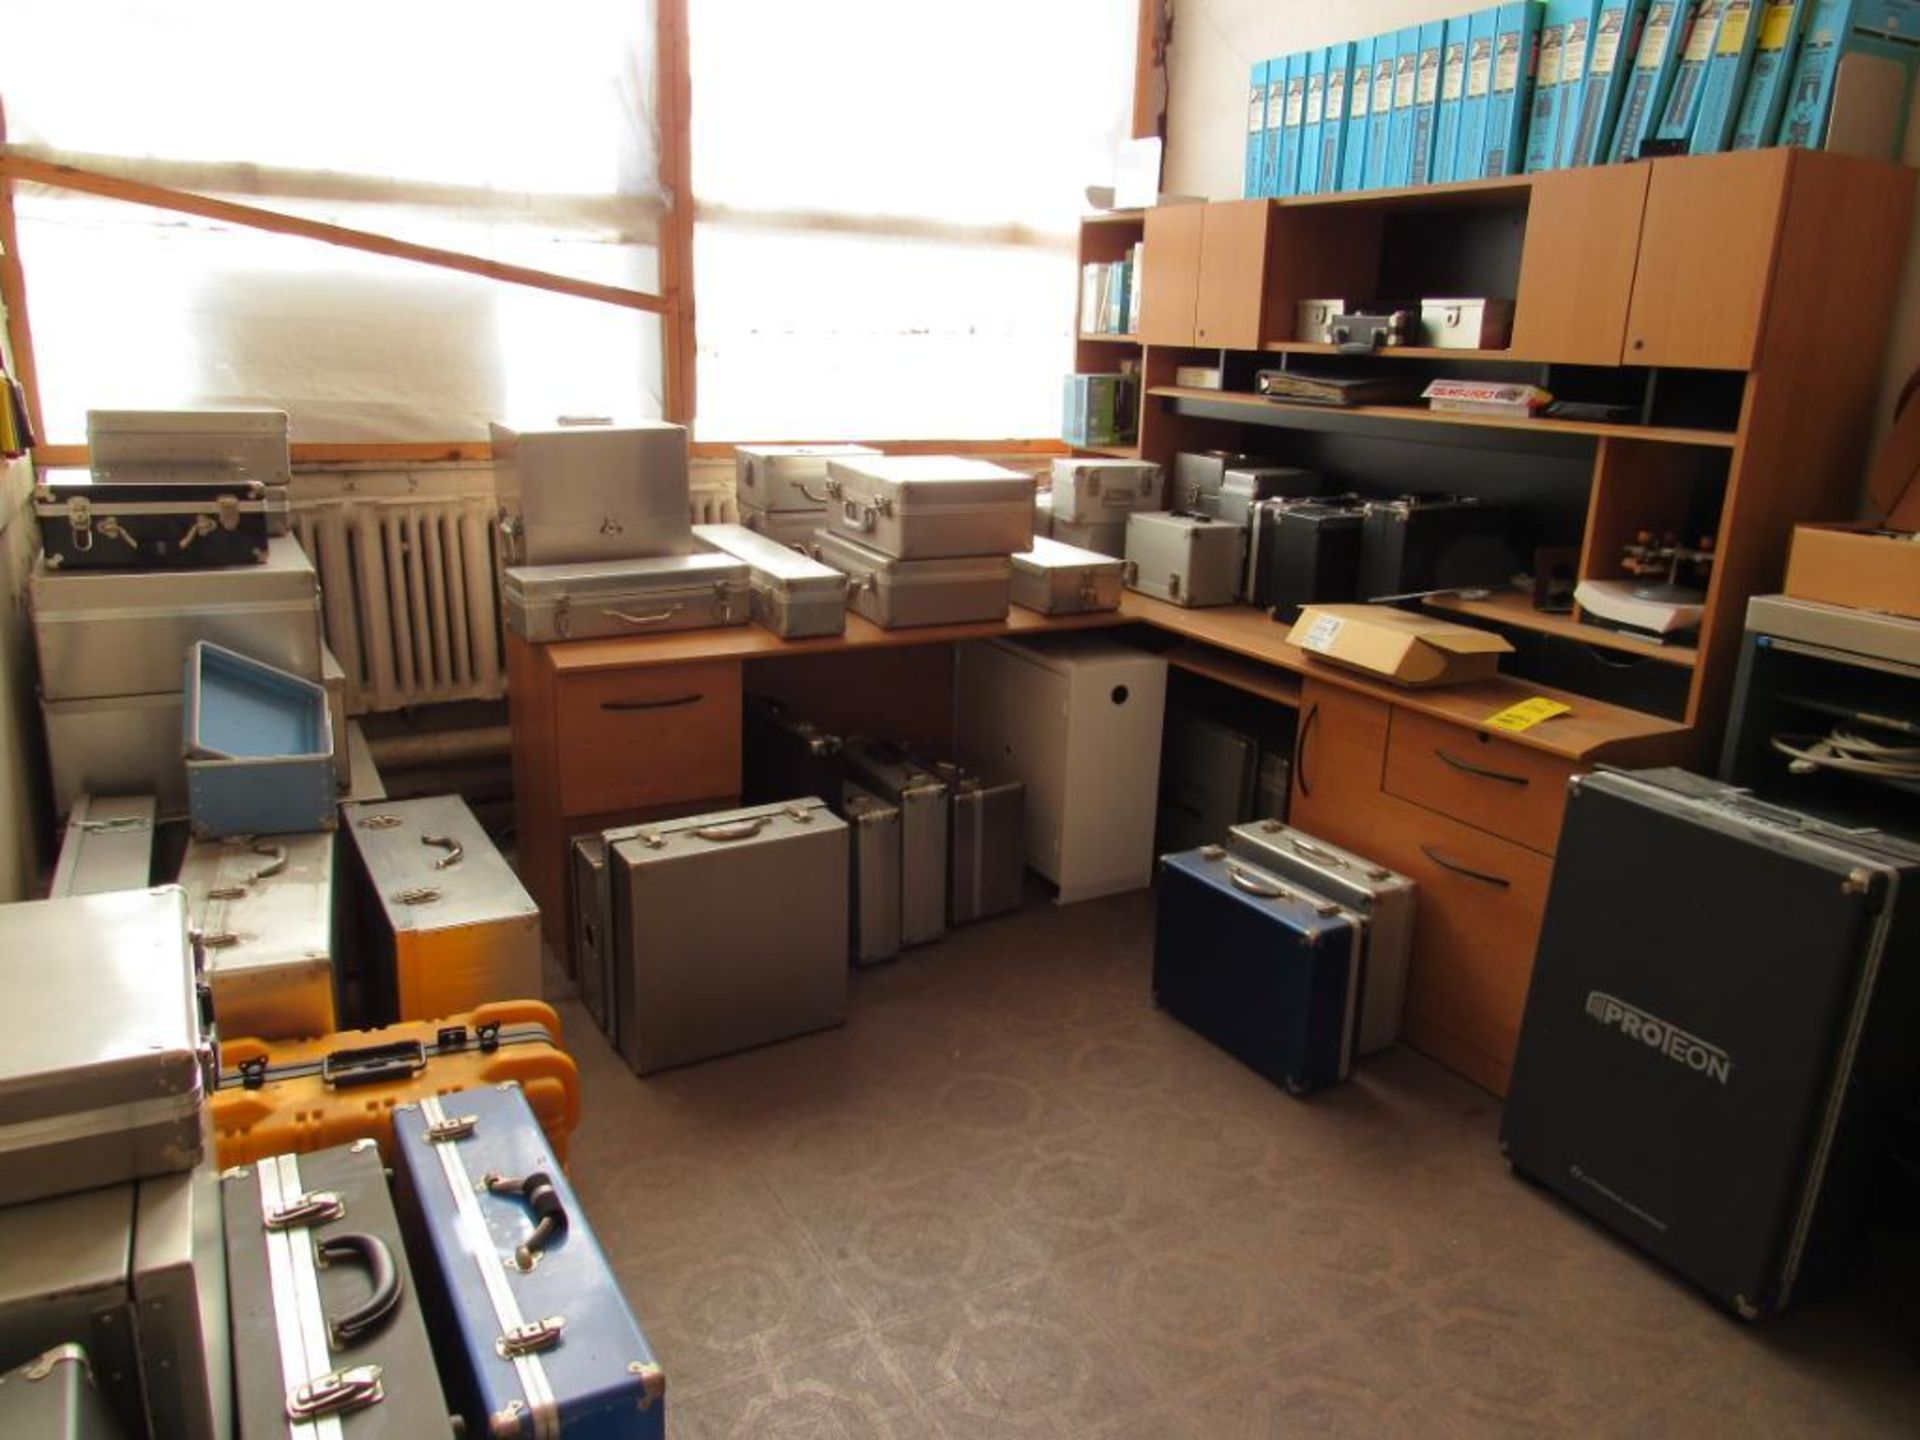 LOT: Contents of Office including (1) Desk with Return, (1) Cabinet, Assorted Aluminum Cases (no bui